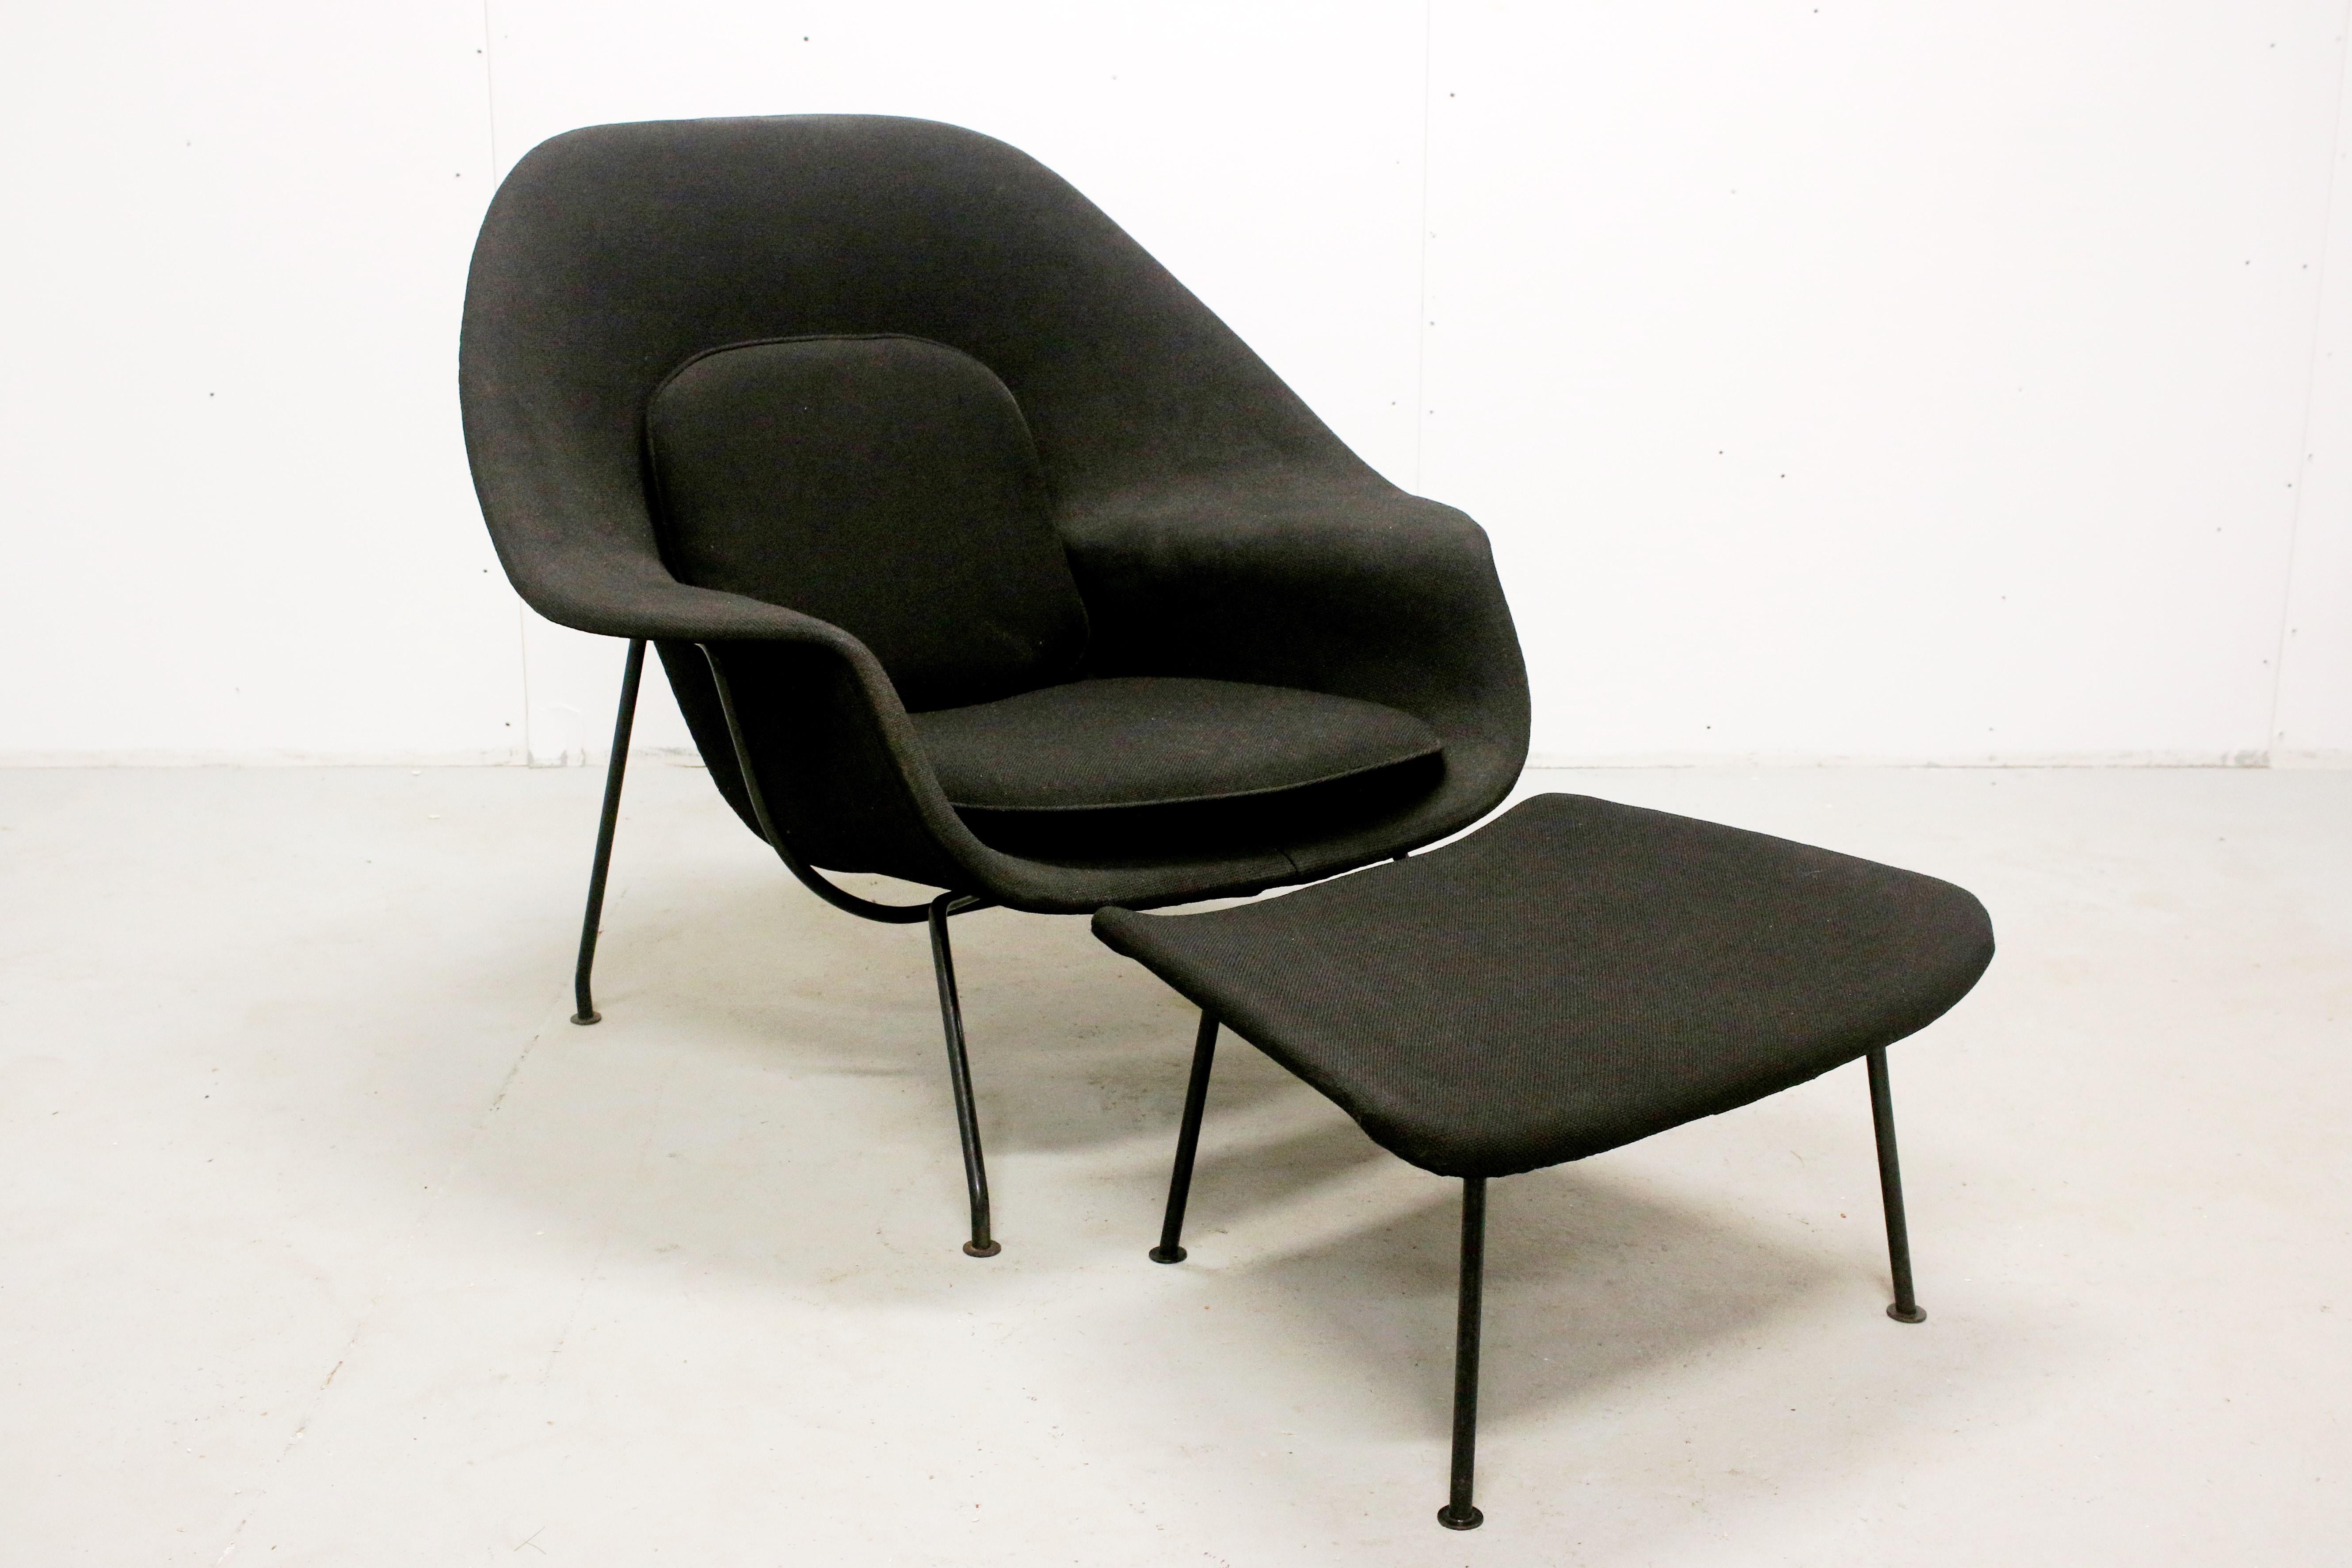 Eero Saarinen Womb Chair and Ottoman, made by Knoll, USA, 1950s-1960s. Early production with black enameled steel frame. Some age appropriate signs of use and wear to black fabric, no rips or tears. Could be reupholstered in new fabric if desired.